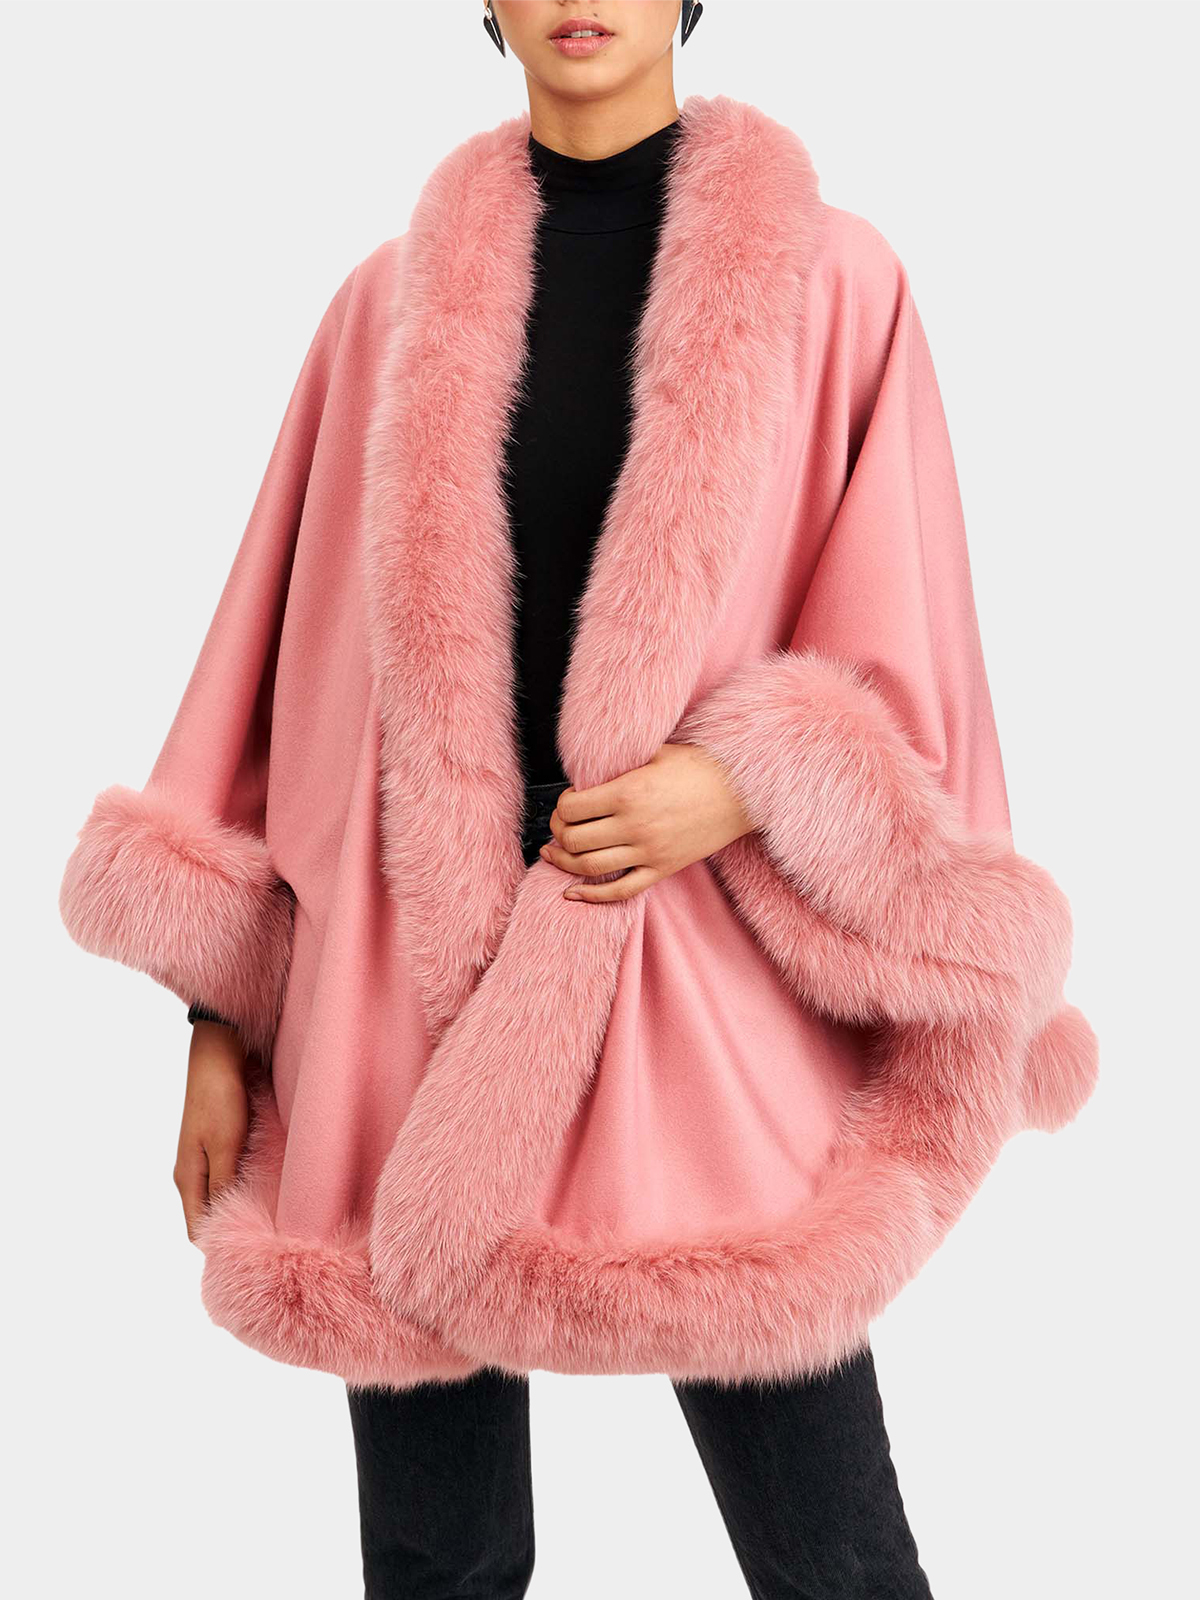 Woman's Pink Cashmere Capelet with Fox Trim